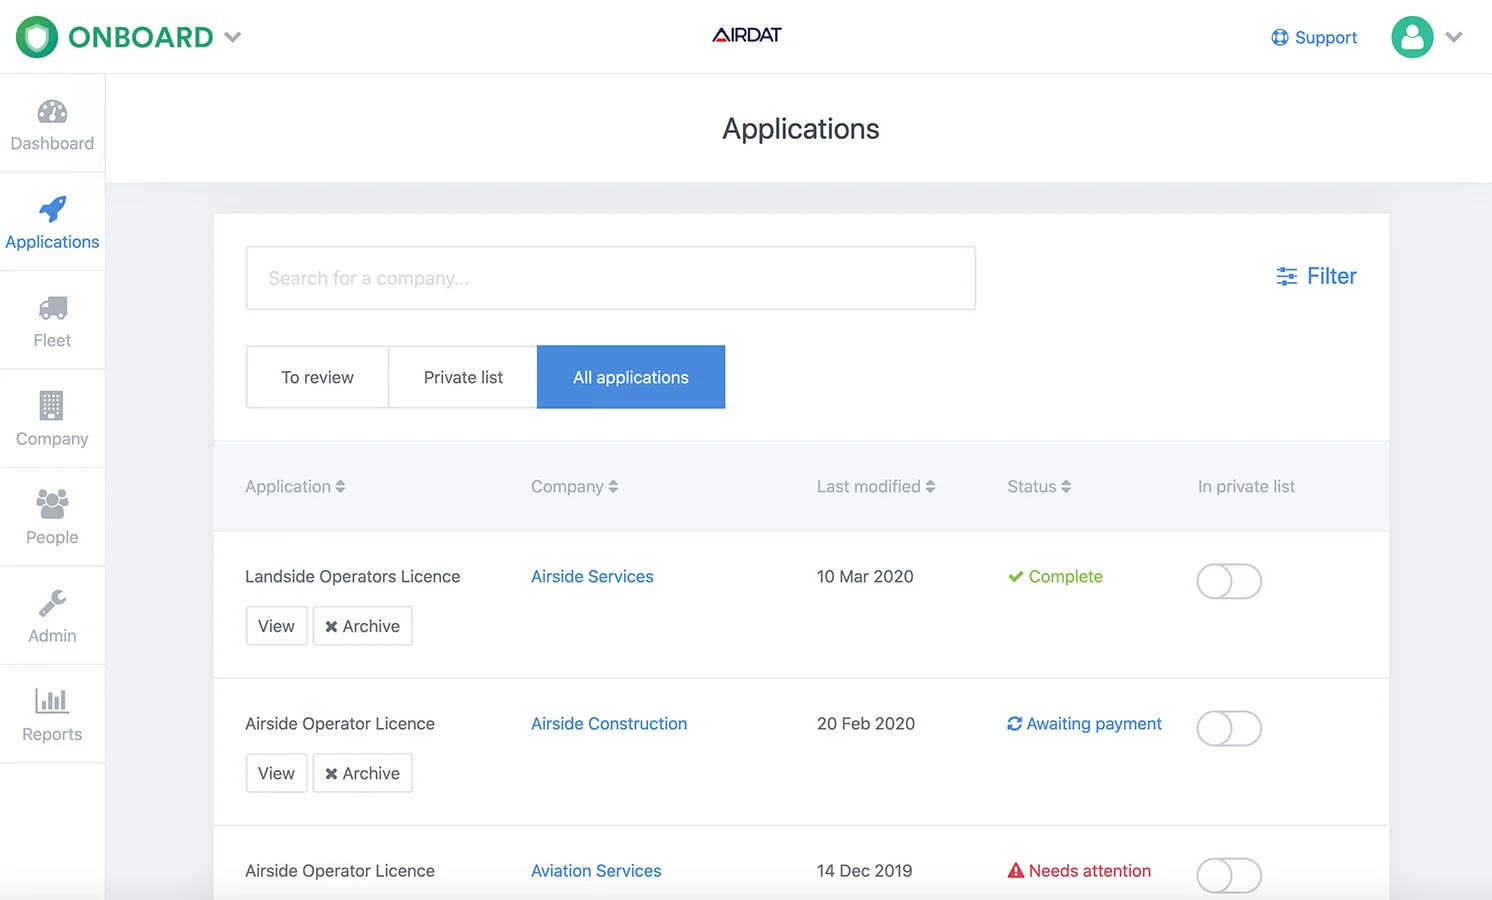 Permit Applications List | AIRDAT Onboard